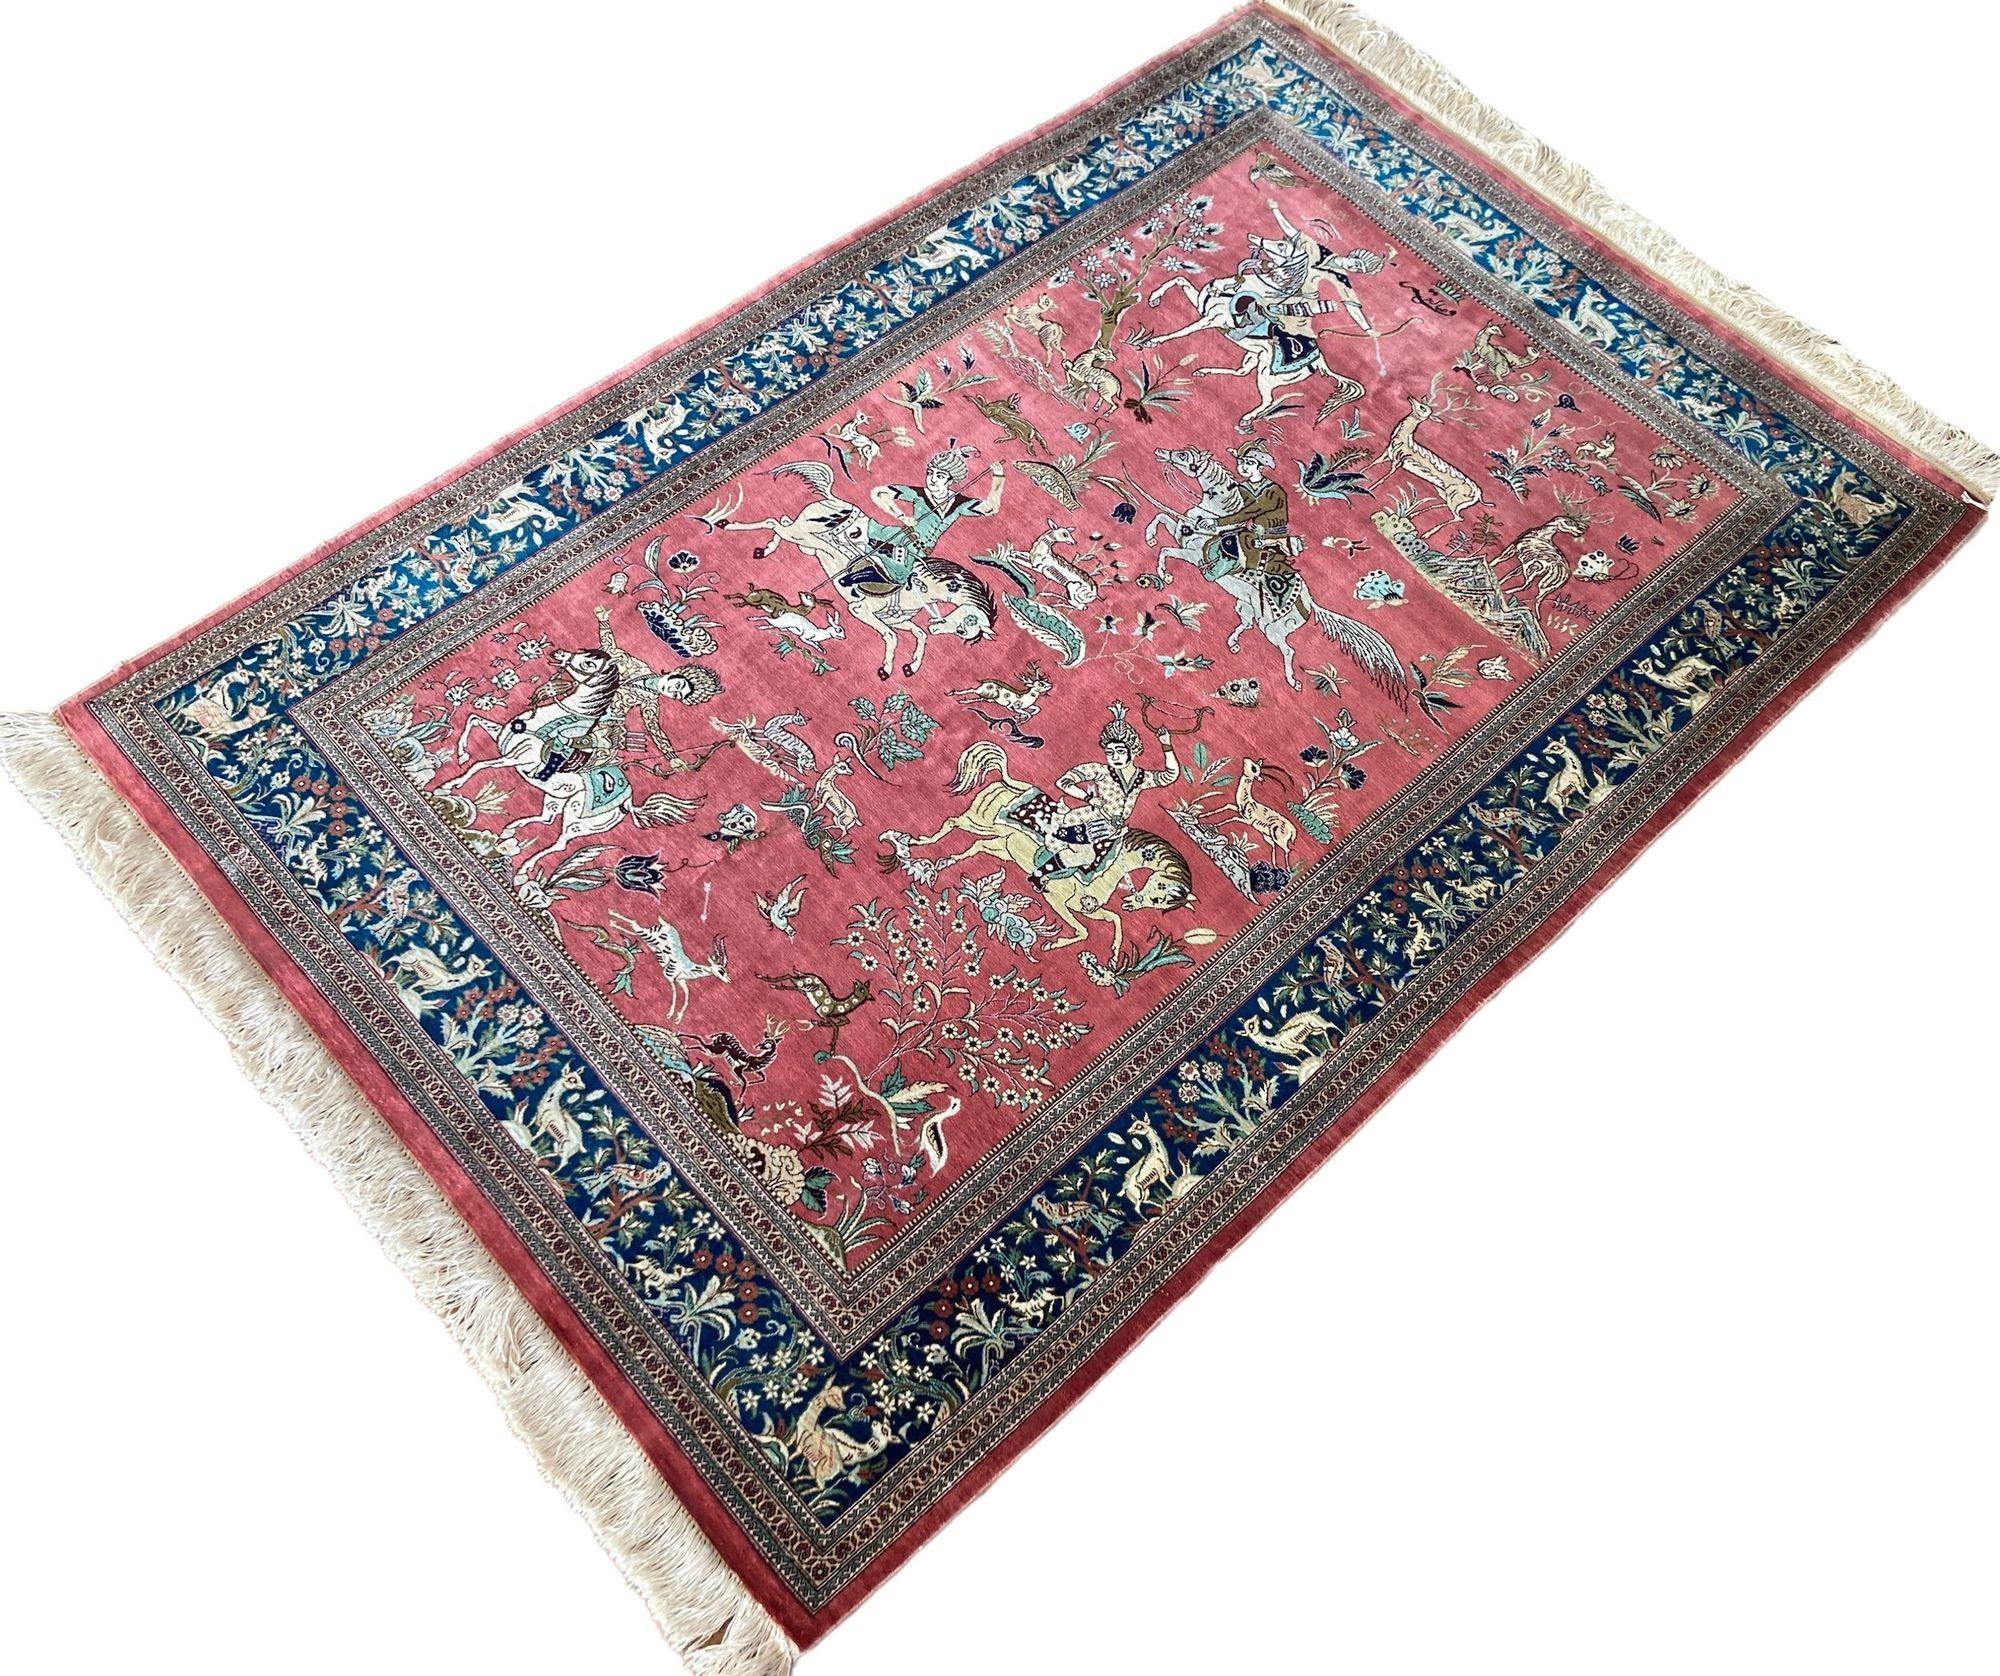 A very fine silk Qum rug, handwoven circa 1980 with a traditional hunting scene on a rose field and blue border. Exceptionally fine with 10x10 knots per centimetre. The figures are particularly interesting with the saddles and jackets having